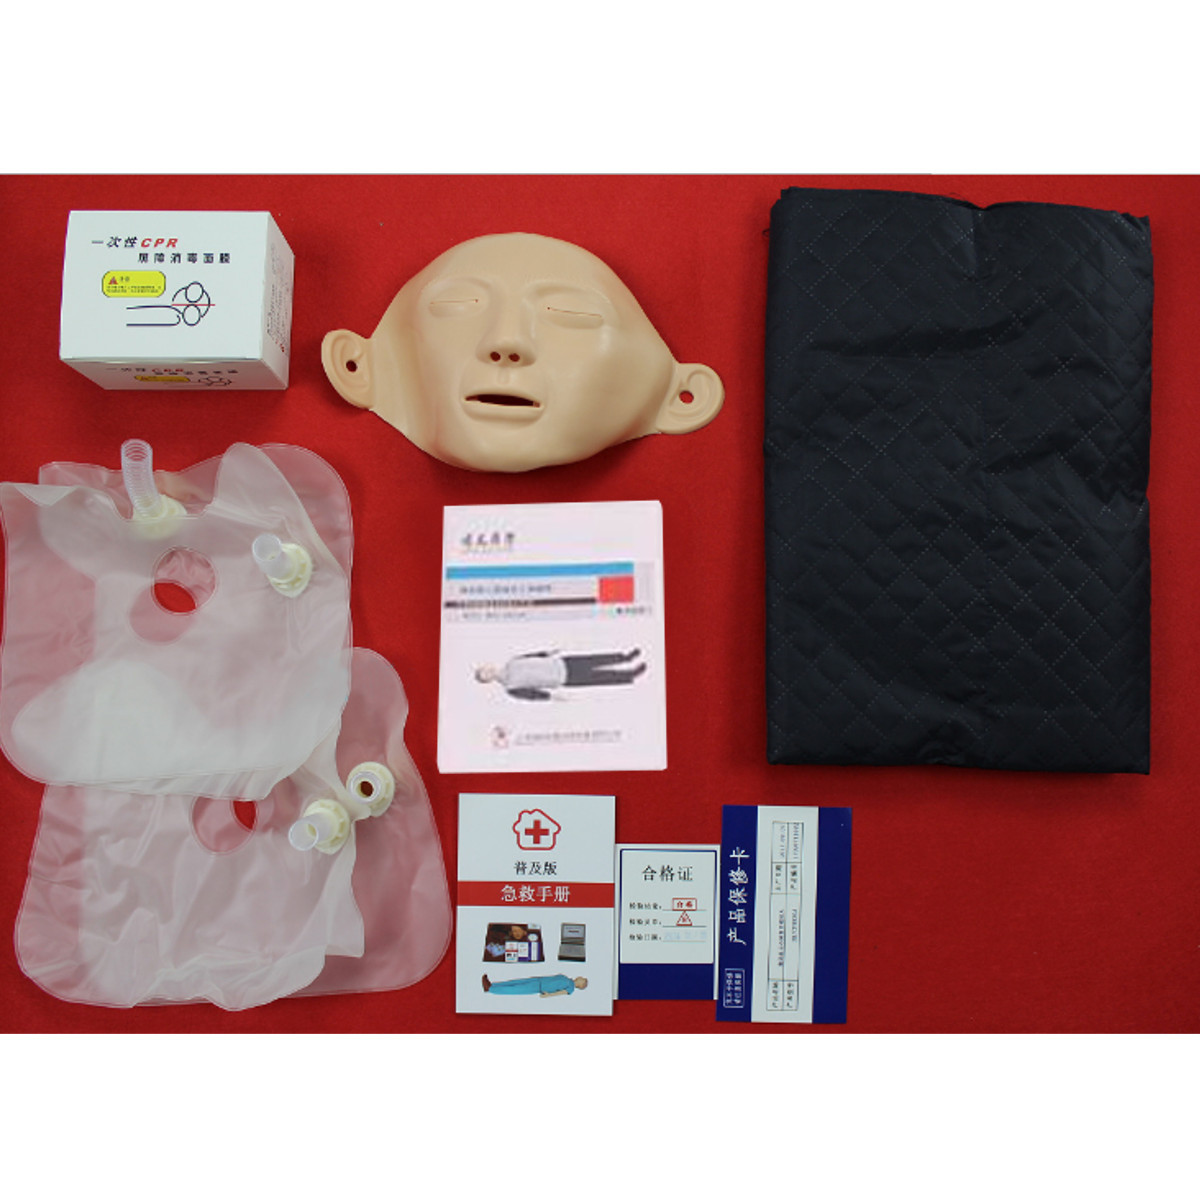 CPR-Adult-Manikin-AED-First-Aid-Training-Dummy-Training-Medical-Model-Respiration-Human-1545480-7